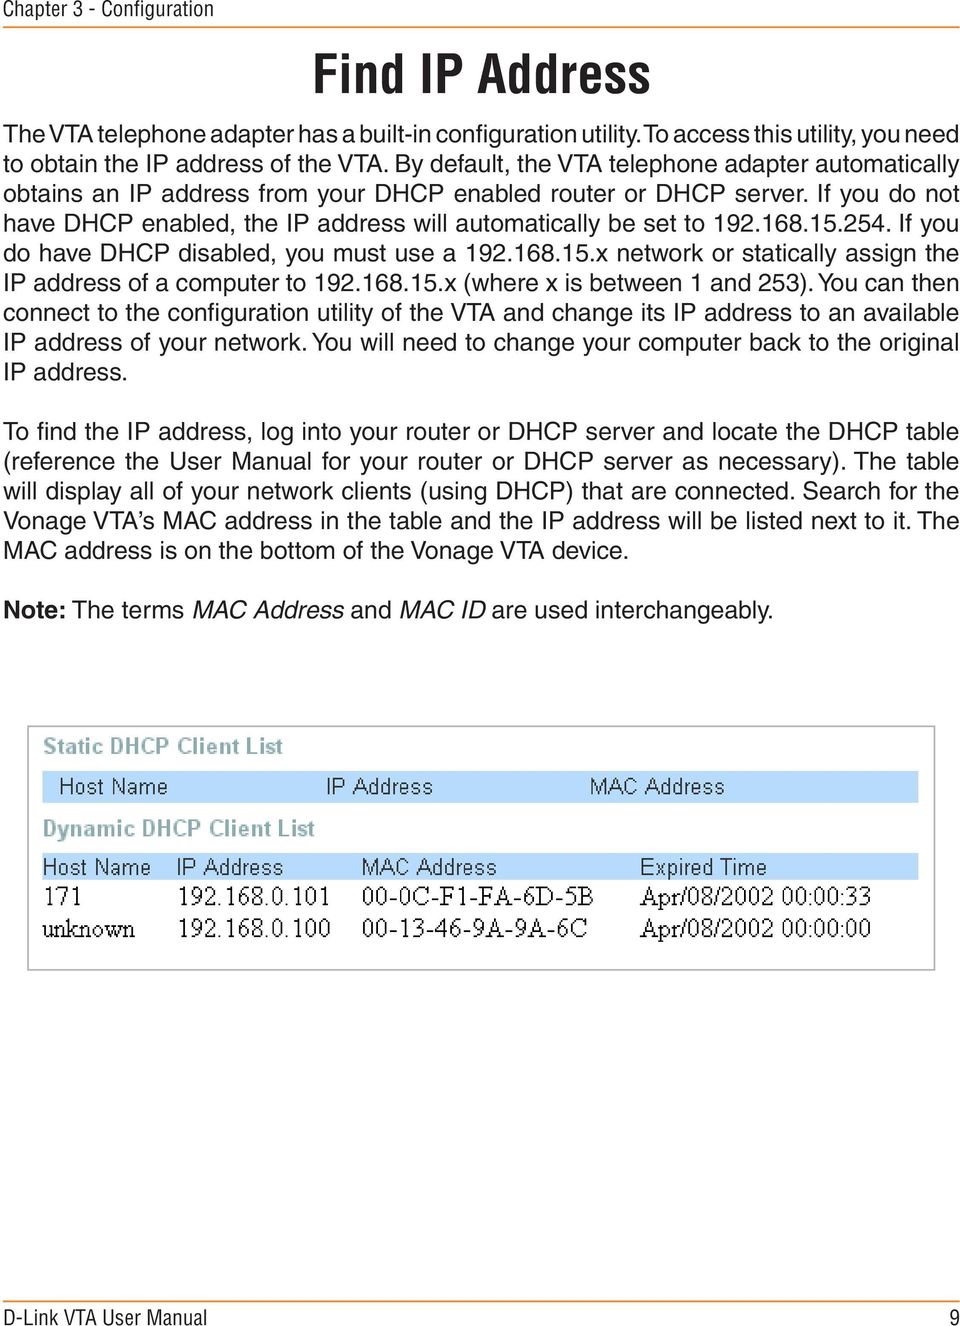 If you do not have DHCP enabled, the IP address will automatically be set to 192.168.15.254. If you do have DHCP disabled, you must use a 192.168.15.x network or statically assign the IP address of a computer to 192.